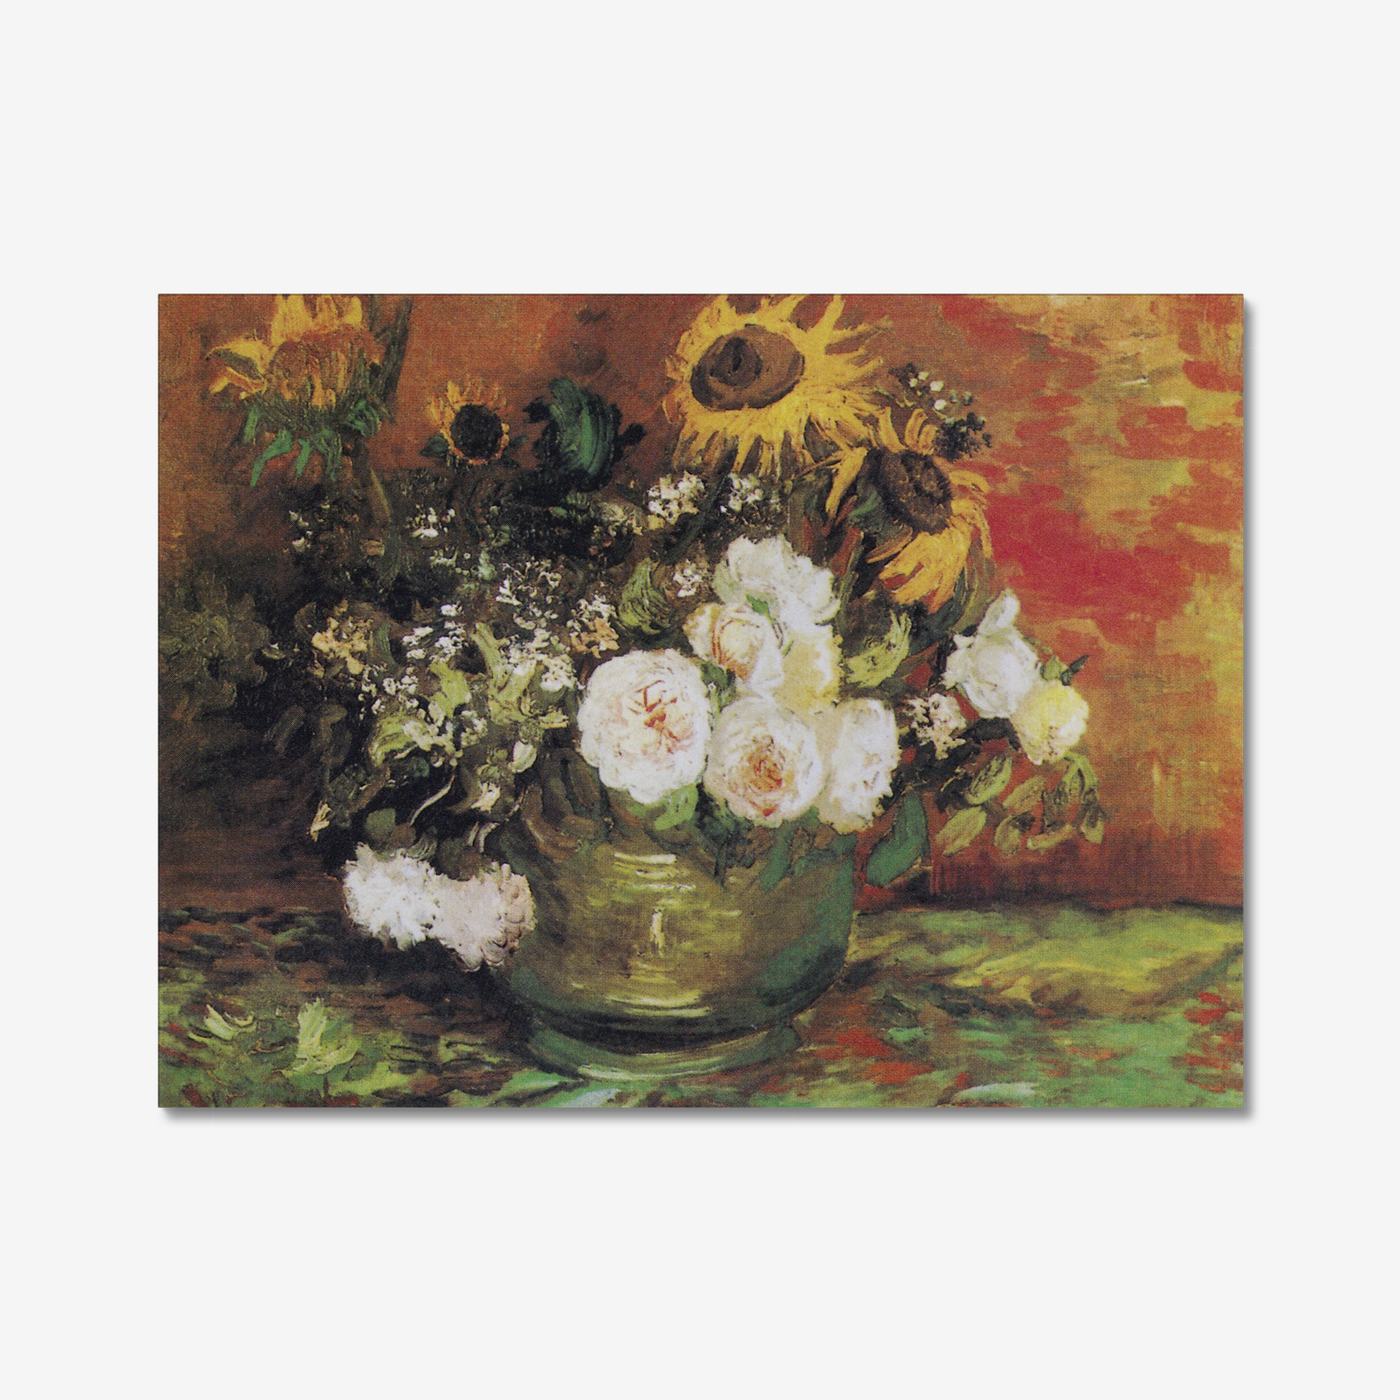 Vincent van Gogh's Bowl With Sunflowers Roses